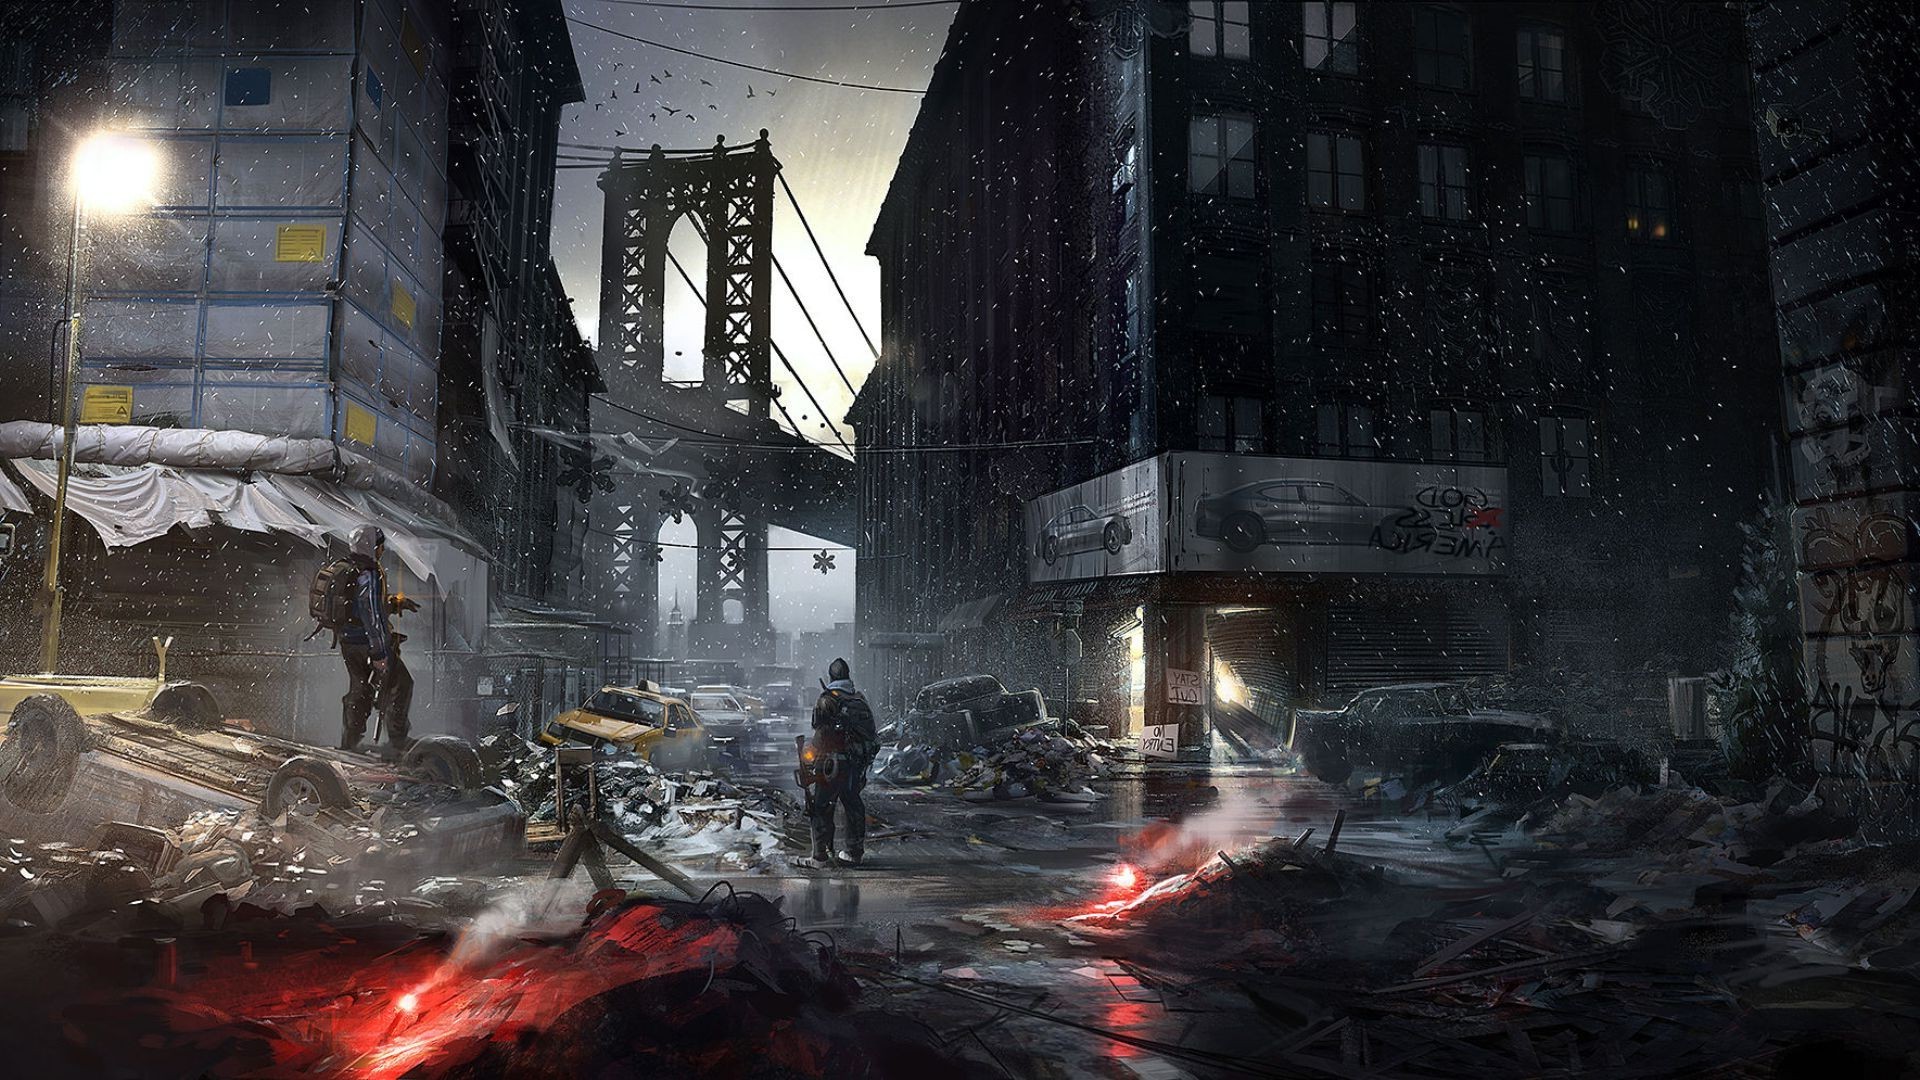 Tom Clancys, Tom Clancys The Division, Video Games, Concept Art, Apocalyptic, Manhattan Wallpaper